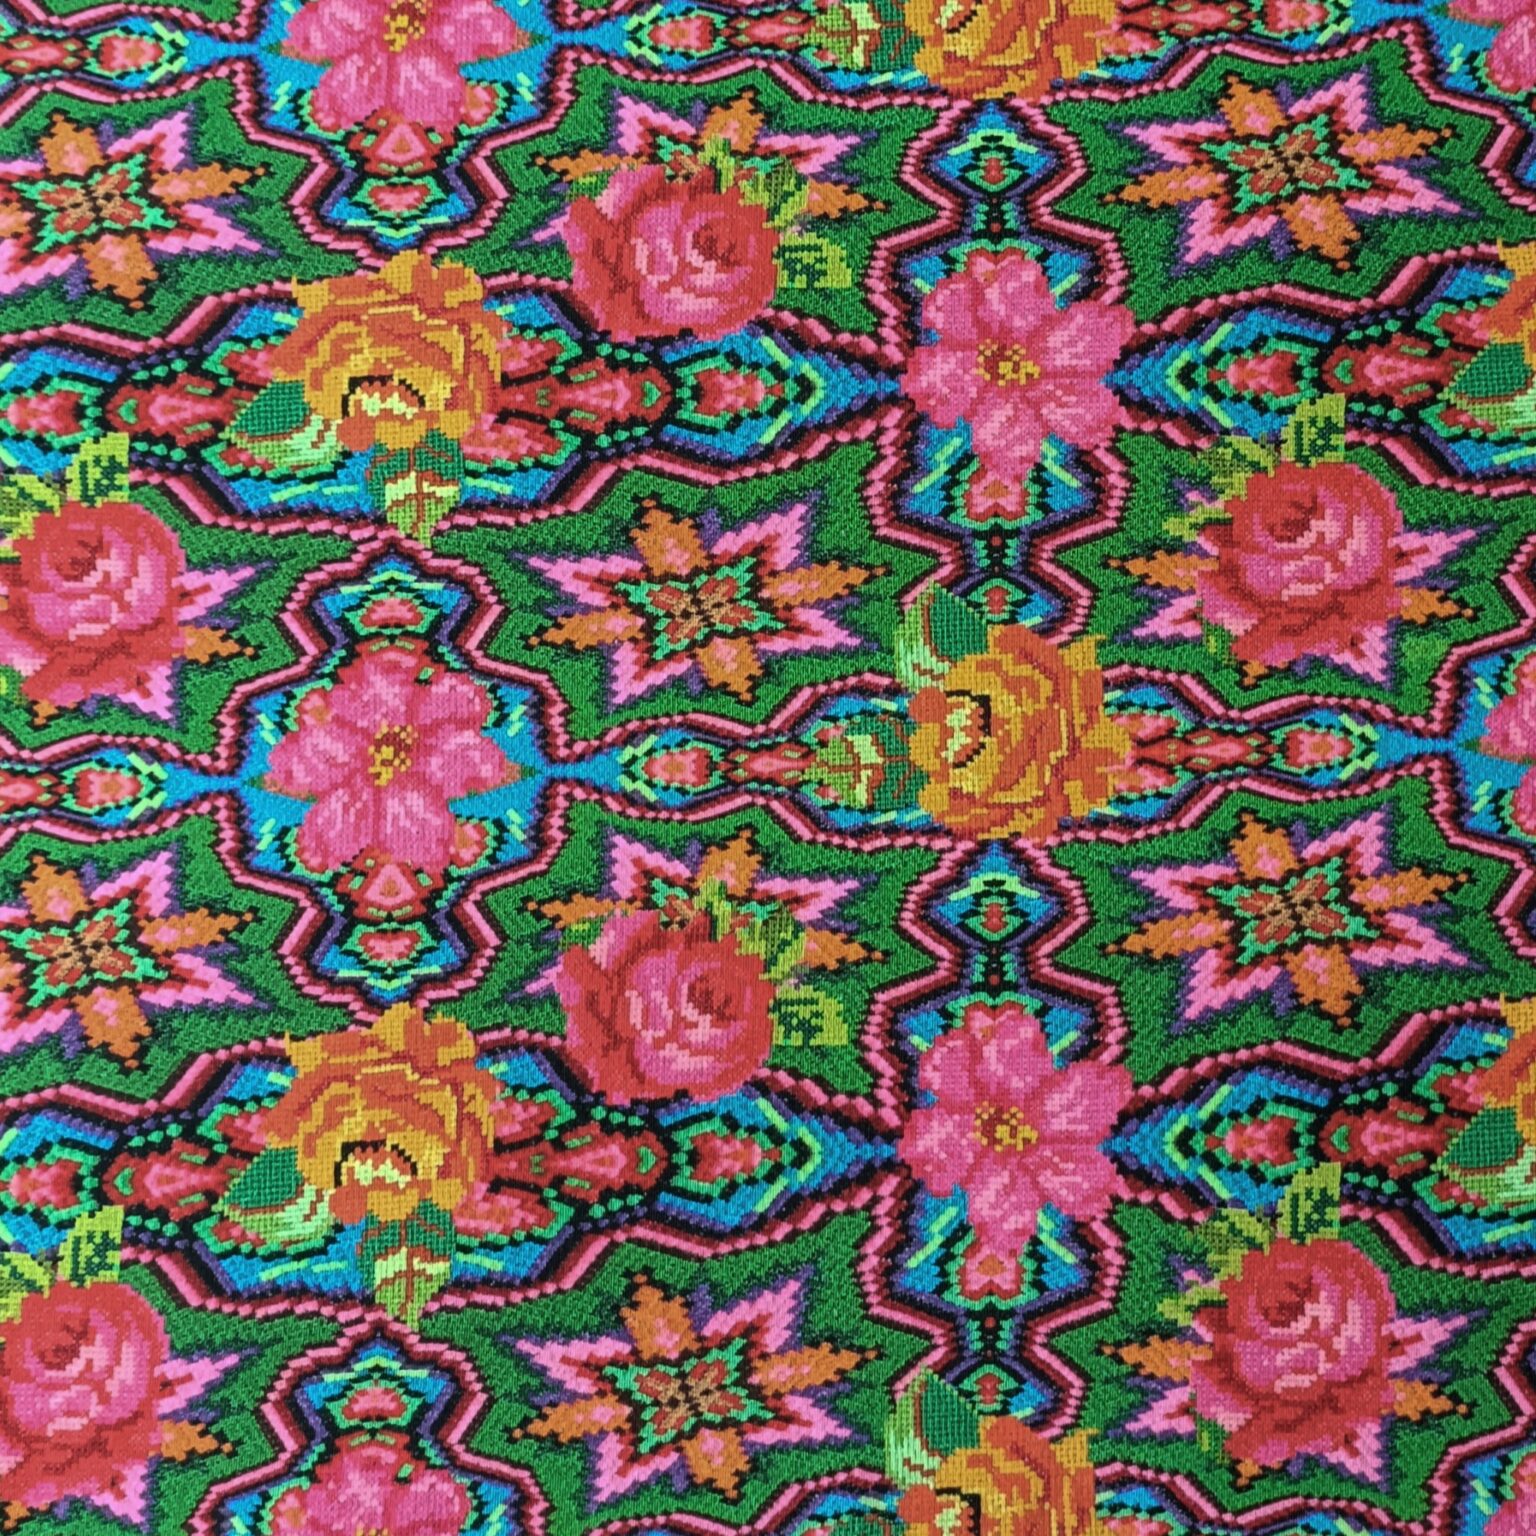 Super bright floral jersey | More Sewing